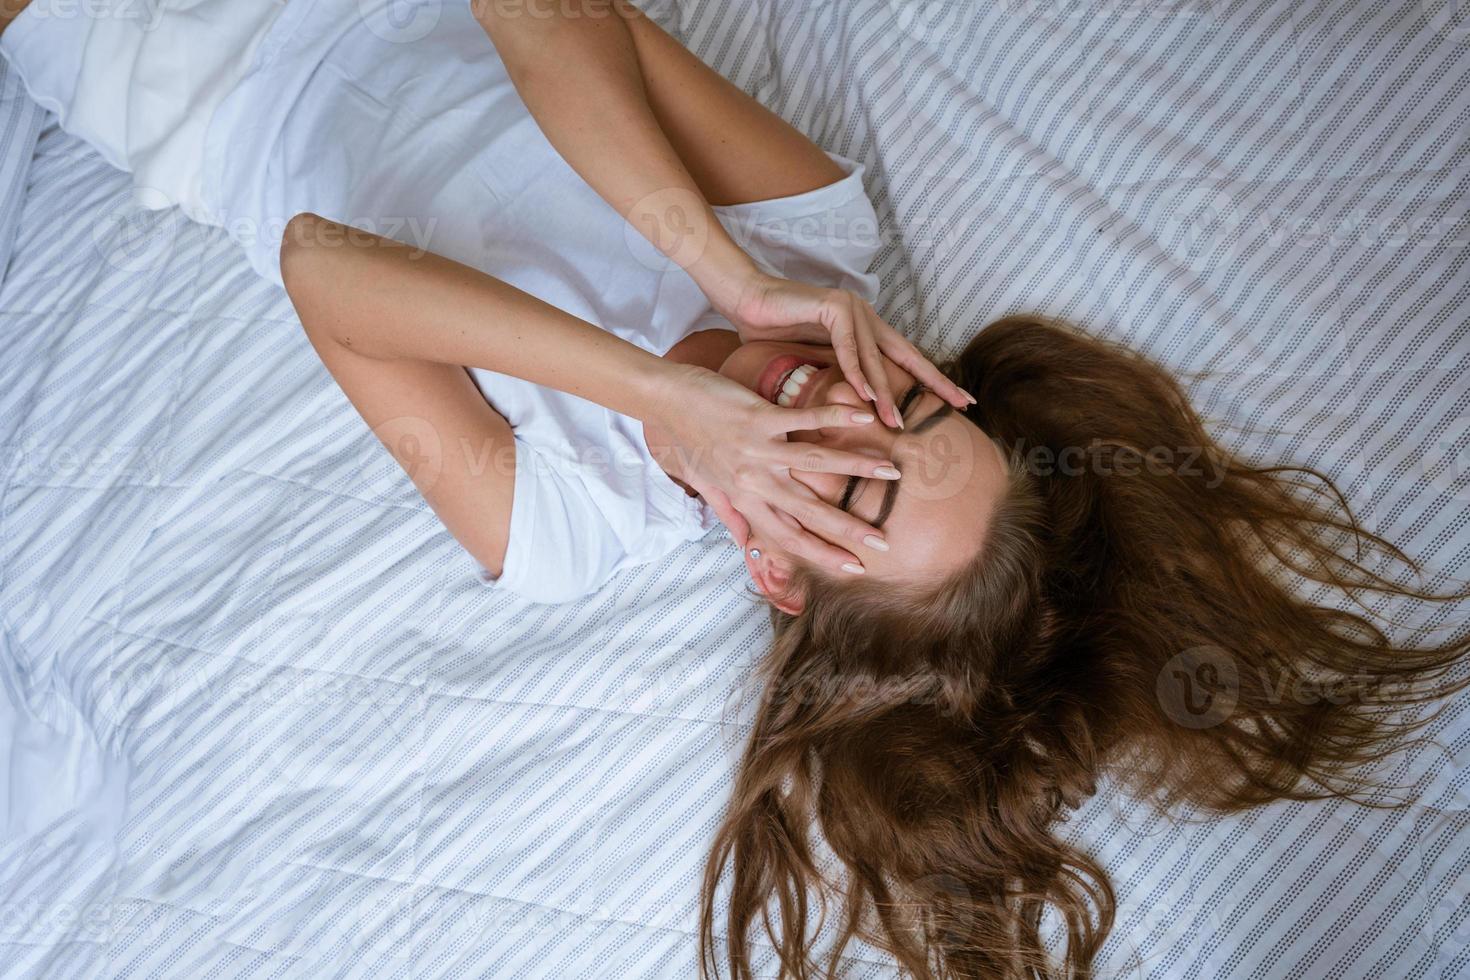 Young woman wakes up after a good night's sleep in photo